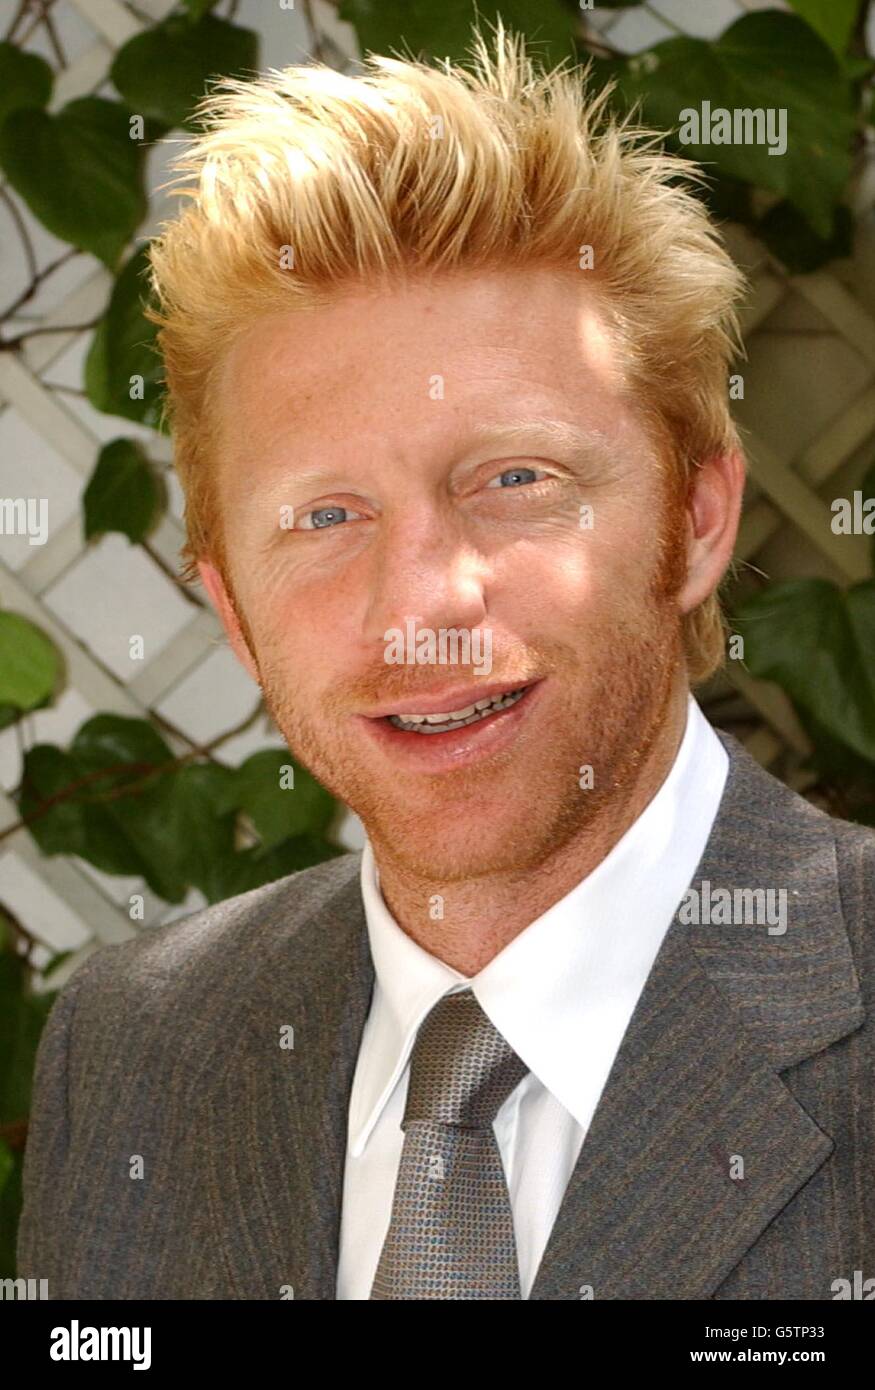 German tennis player Boris Becker at the Halycon Hotel in London, where it was announced that he will be joining the BBC Sport commentary team for the Wimbledon Championships 2002. * 02/05/02: Boris Becker announced he has joined this year's BBC Wimbledon commentary team and delivered a broadside to the men who commentated when he was a champion. The 34-year-old, who rewrote the record books by winning the Wimbledon title in 1985 at the age of just 17, will be joining John McEnroe and Pat Cash, who already commentate for the BBC. Stock Photo